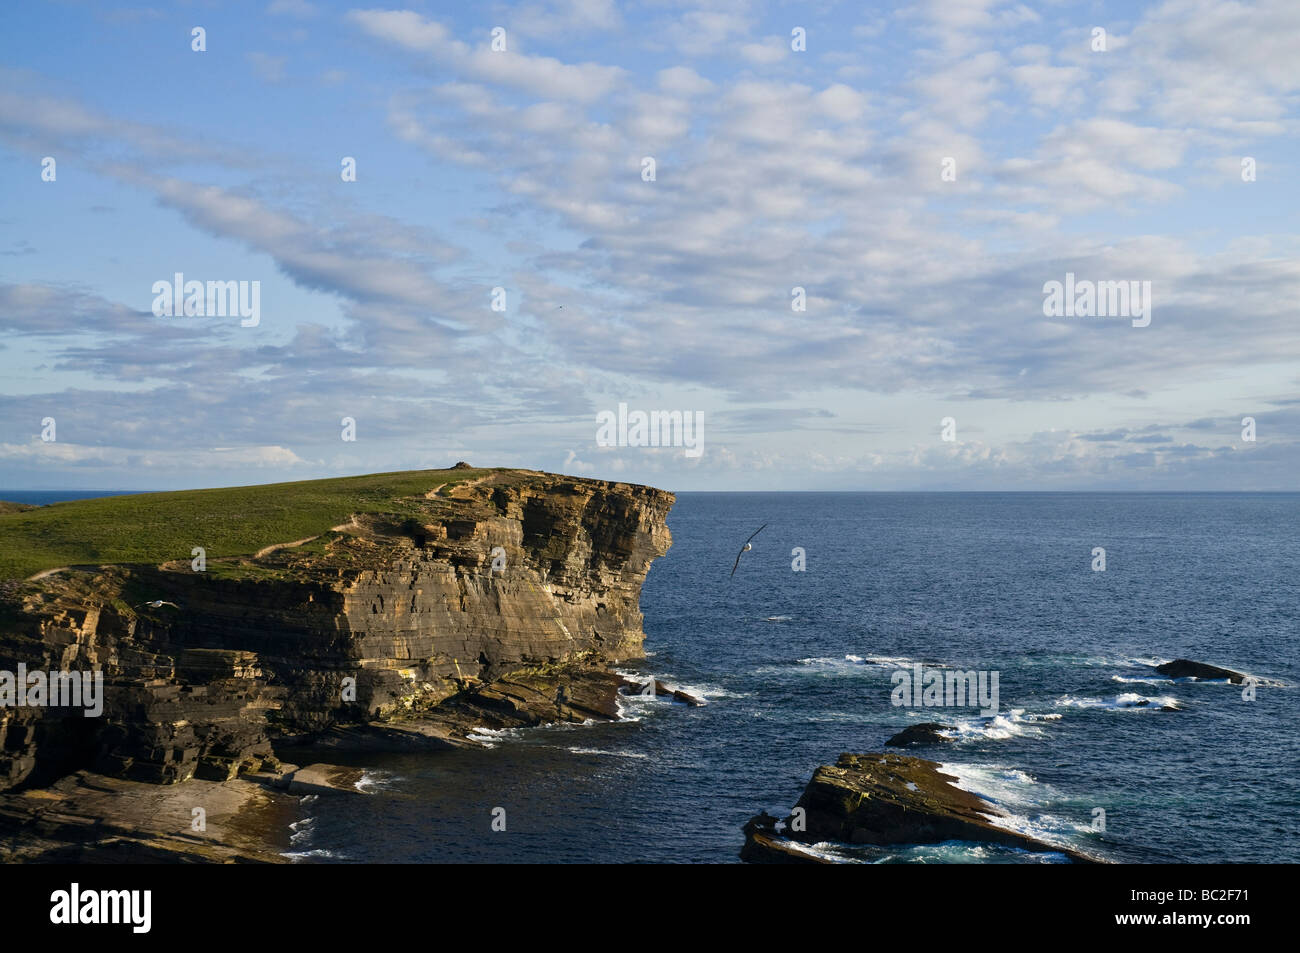 dh Brough of Bigging YESNABY ORKNEY West coast seacliff evening dusk fulmars gliding Stock Photo